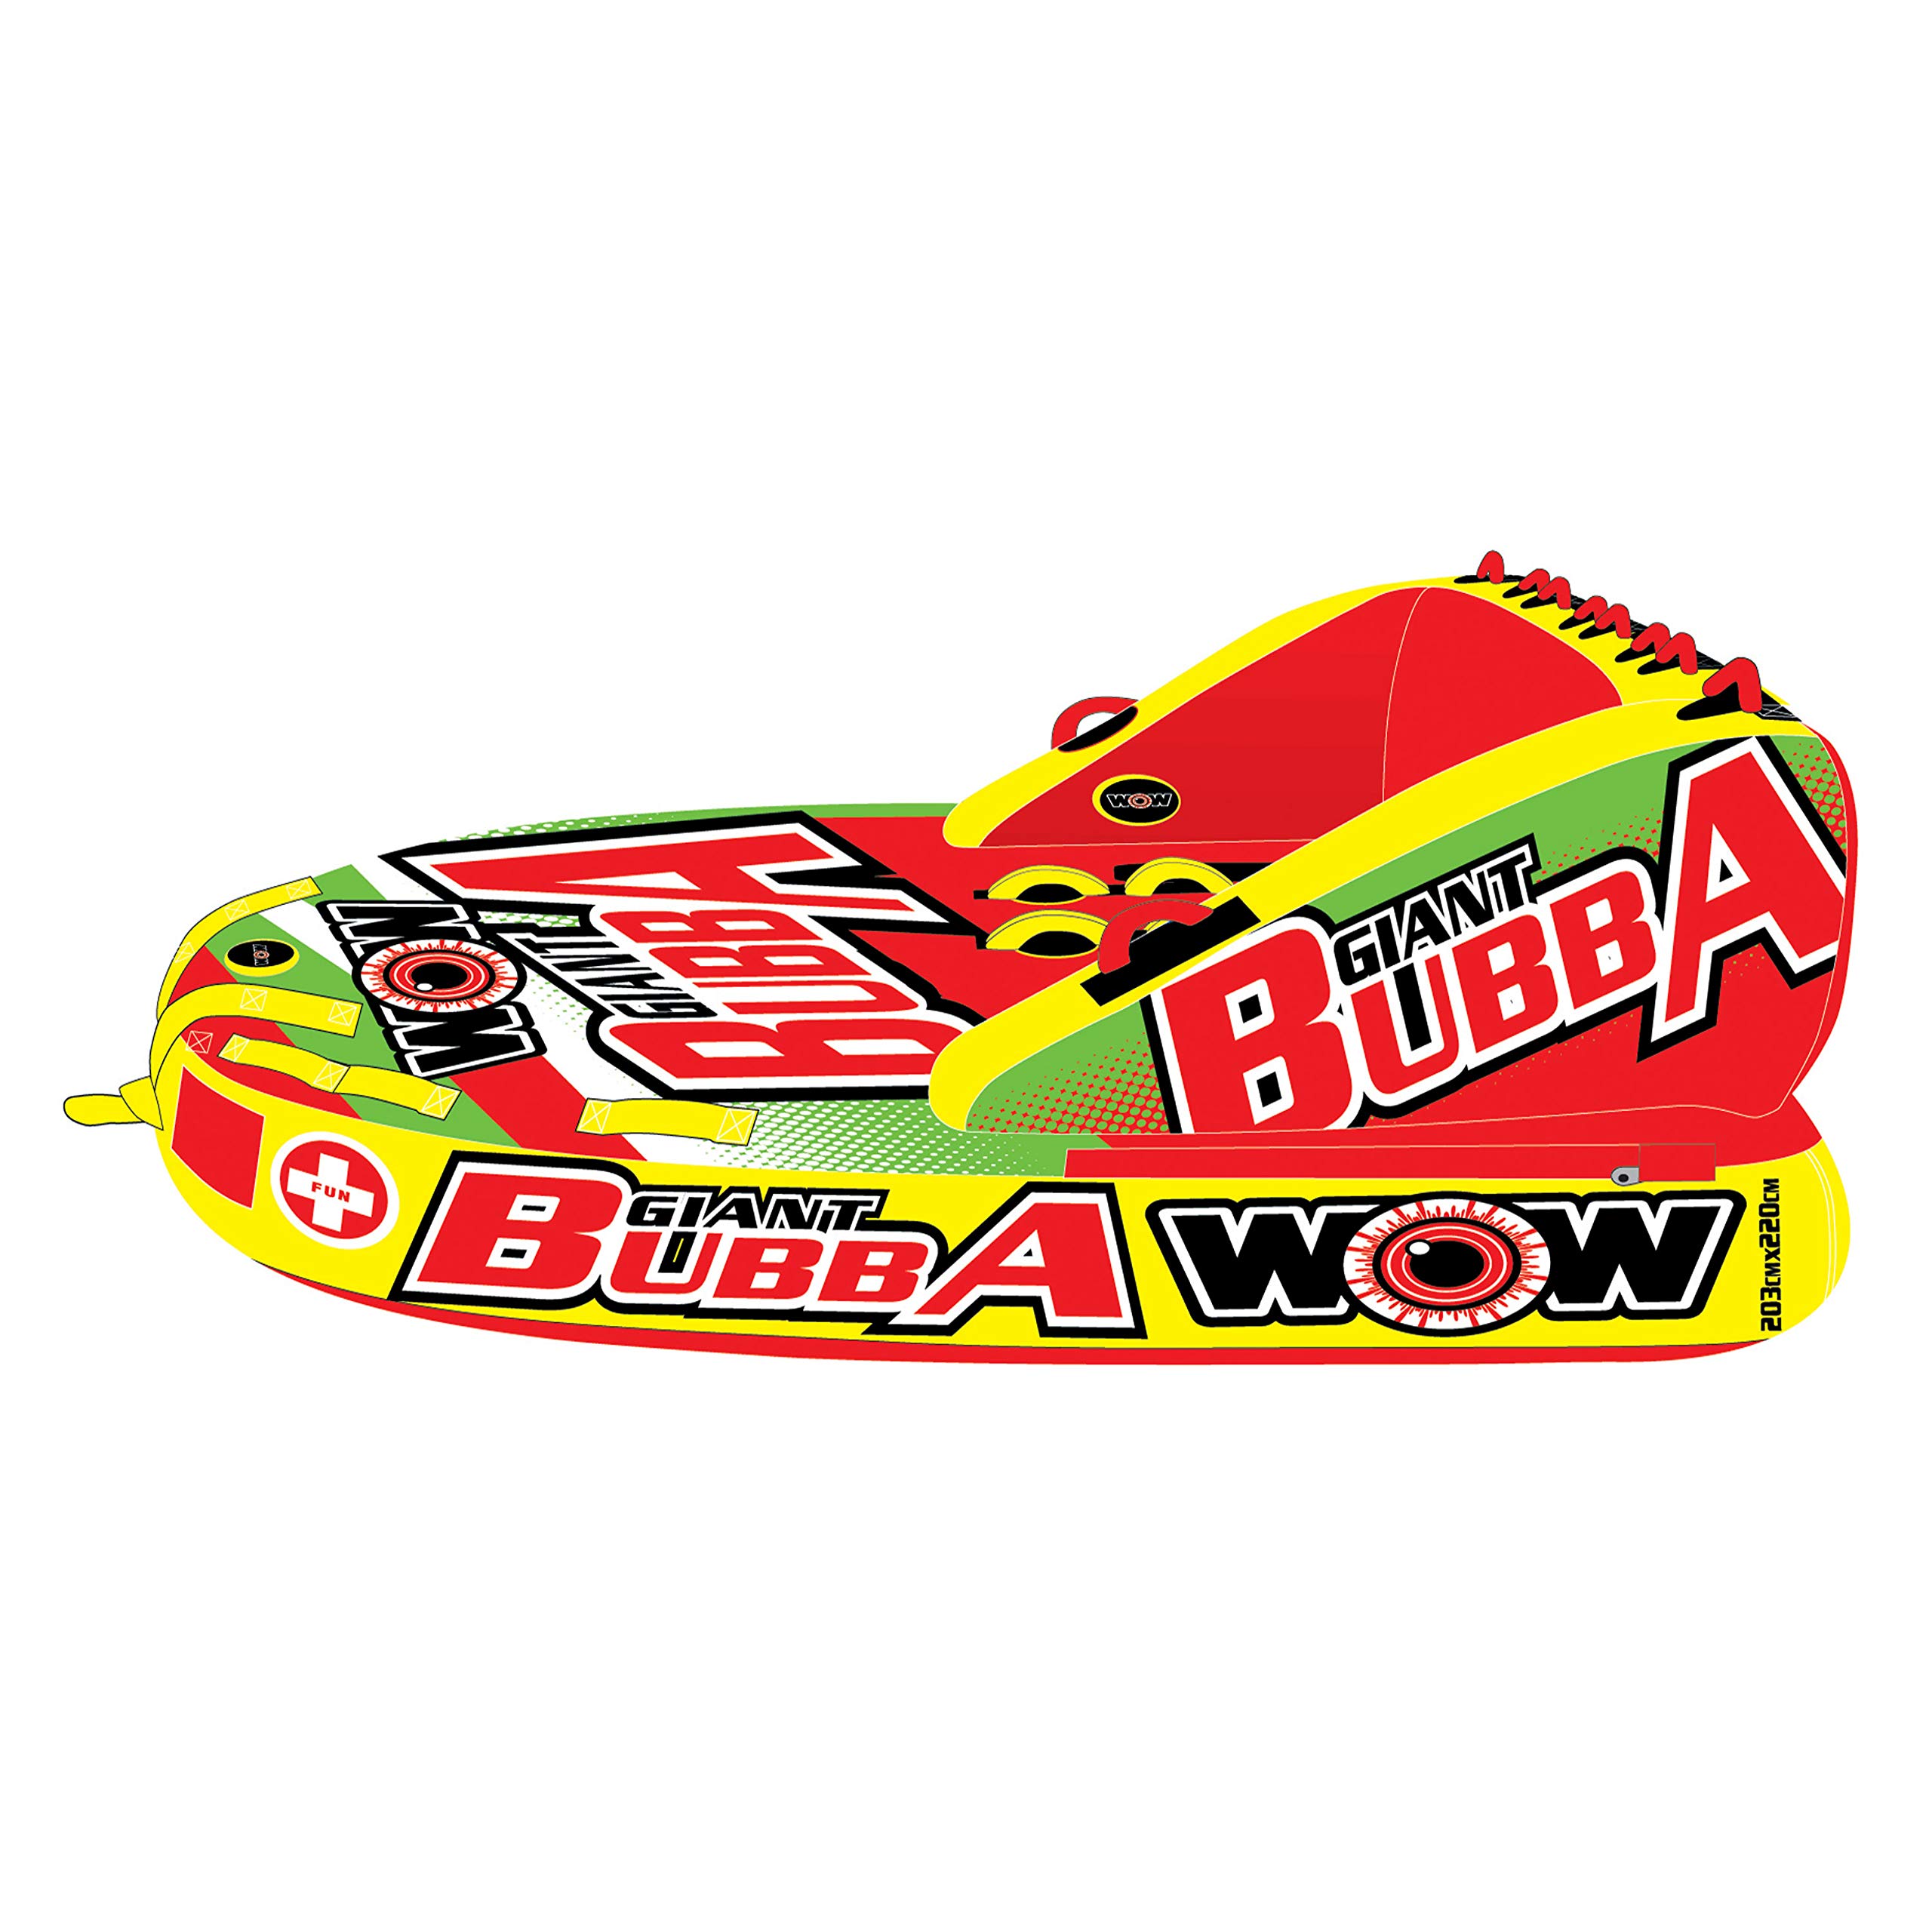 Wow Giant Bubba Towable Tube for Boating 1-4 Persons